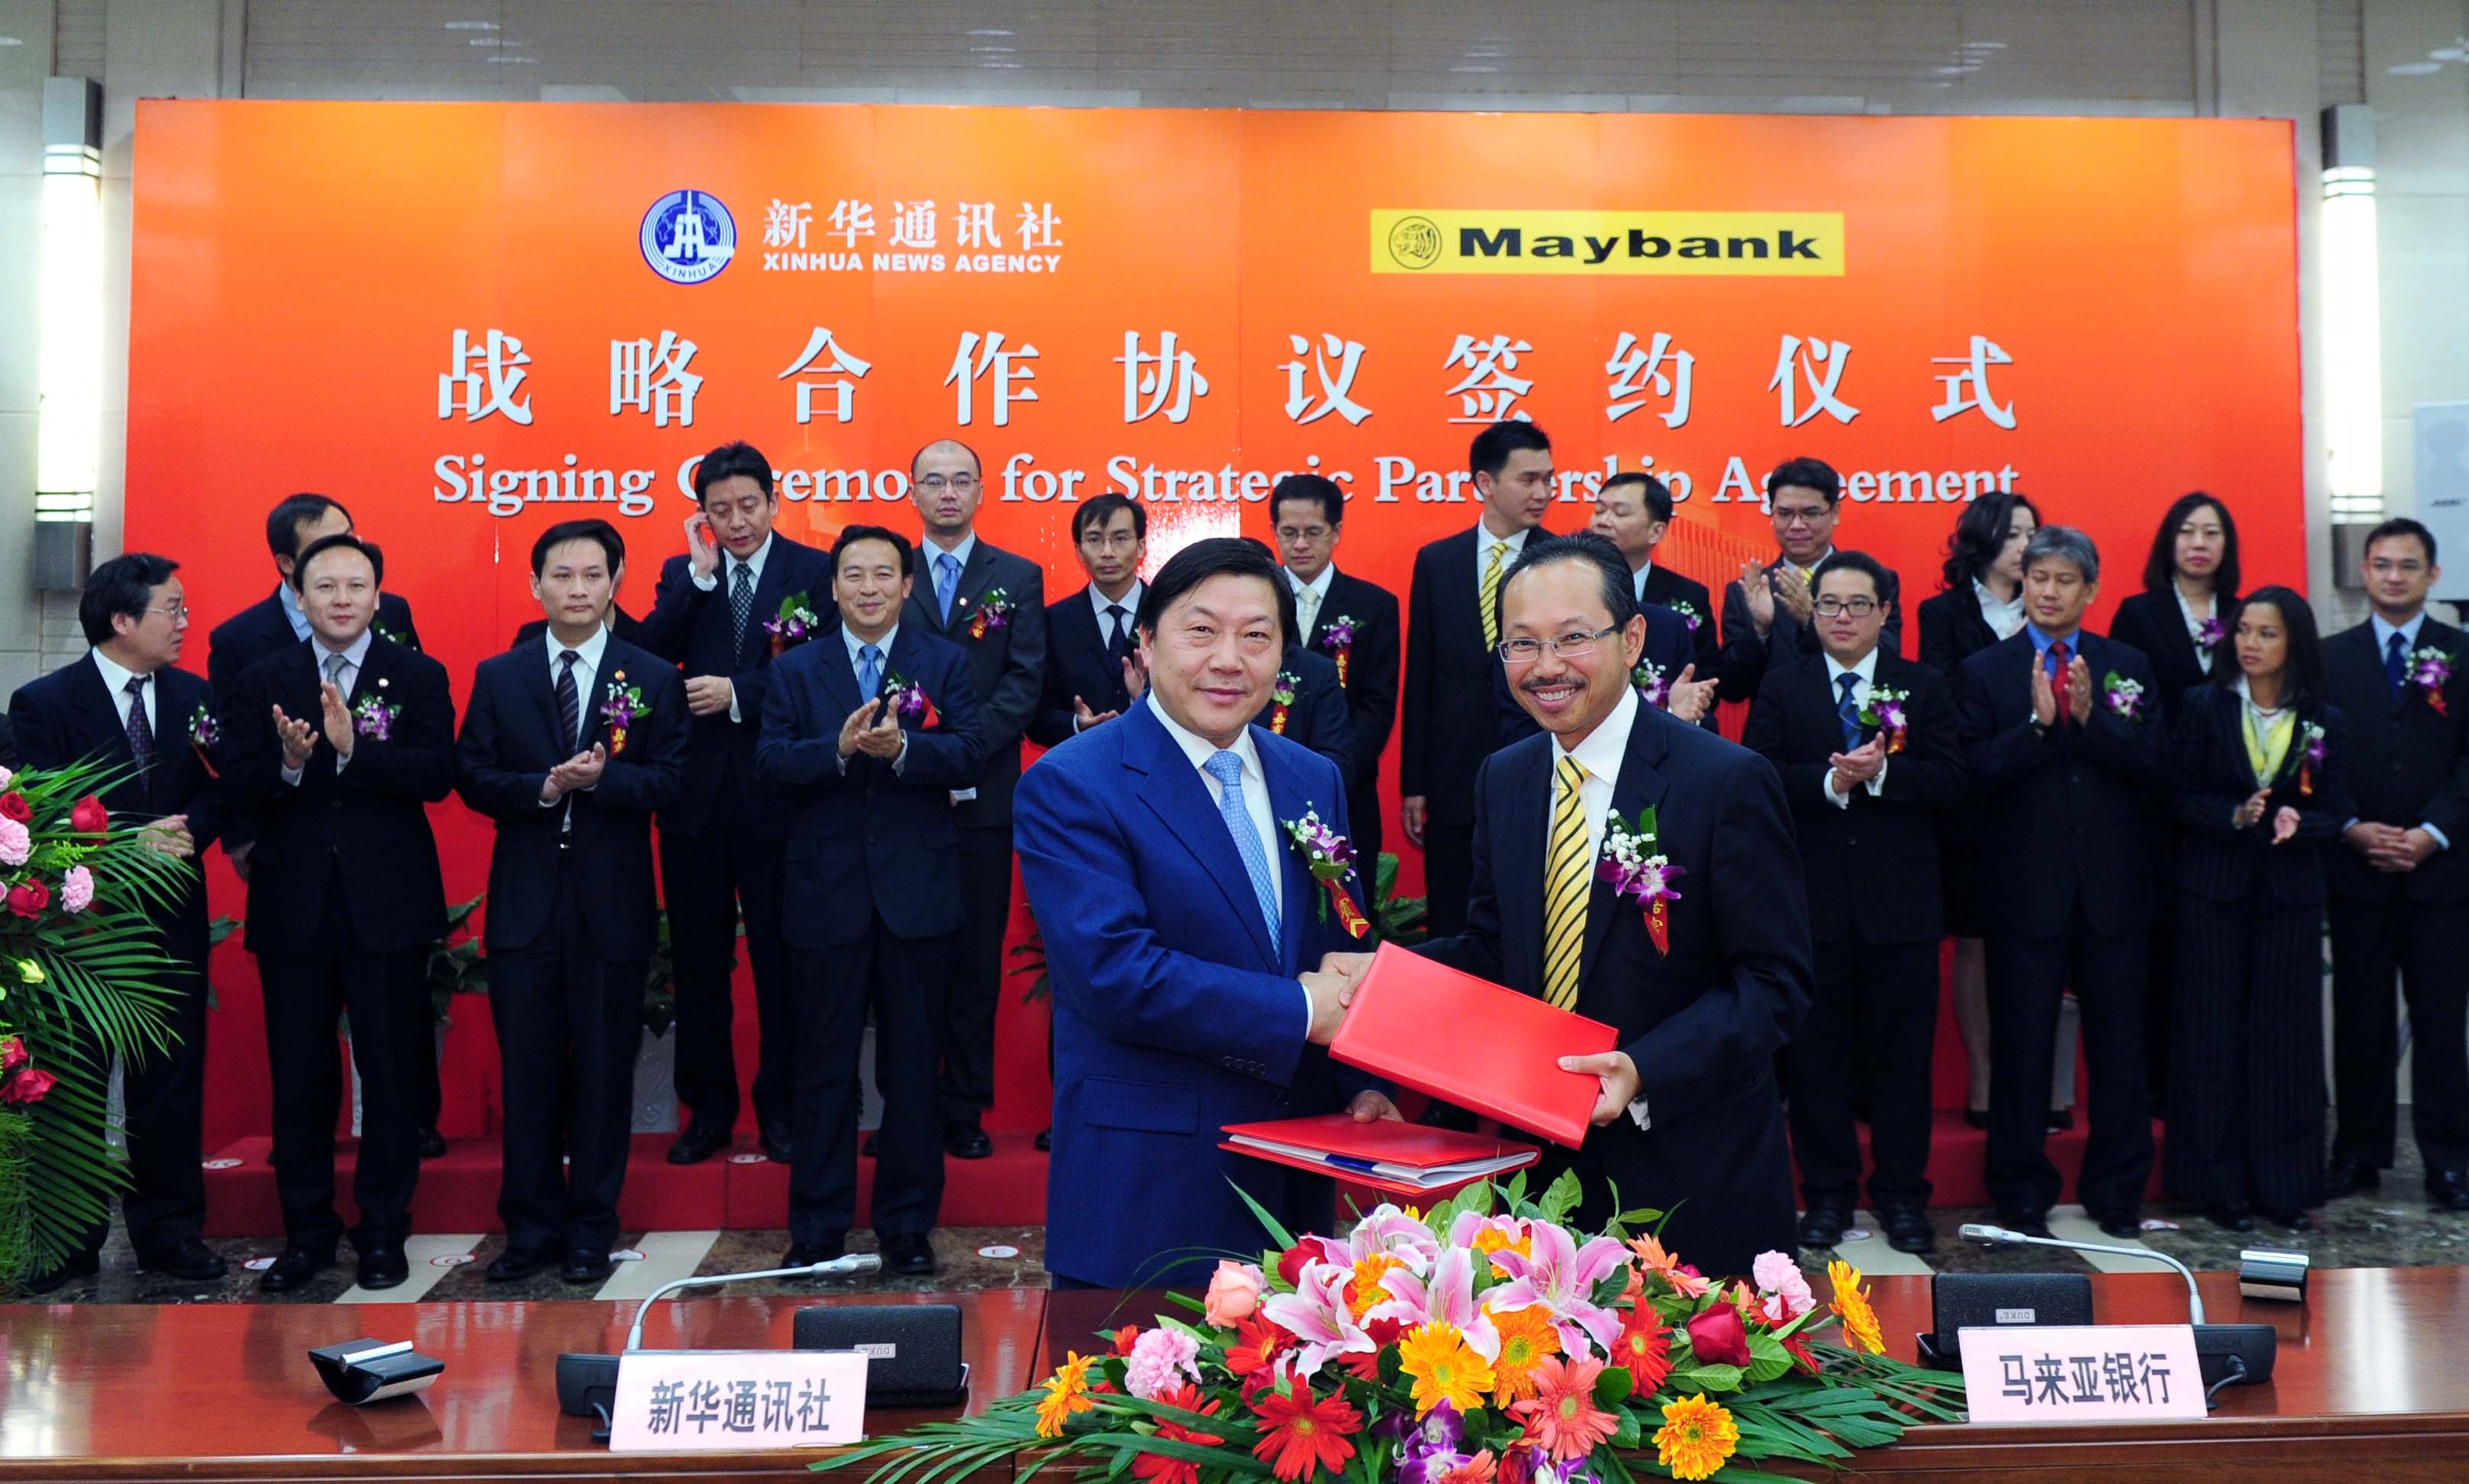 President and Chief Executive Officer of Maybank, Dato' Sri Abdul Wahid Omar exchanging documents with Mr. Lu Wei, Vice President of Xinhua News Agency during the Maybank-Xinhua agreement signing ceremony in Beijing.